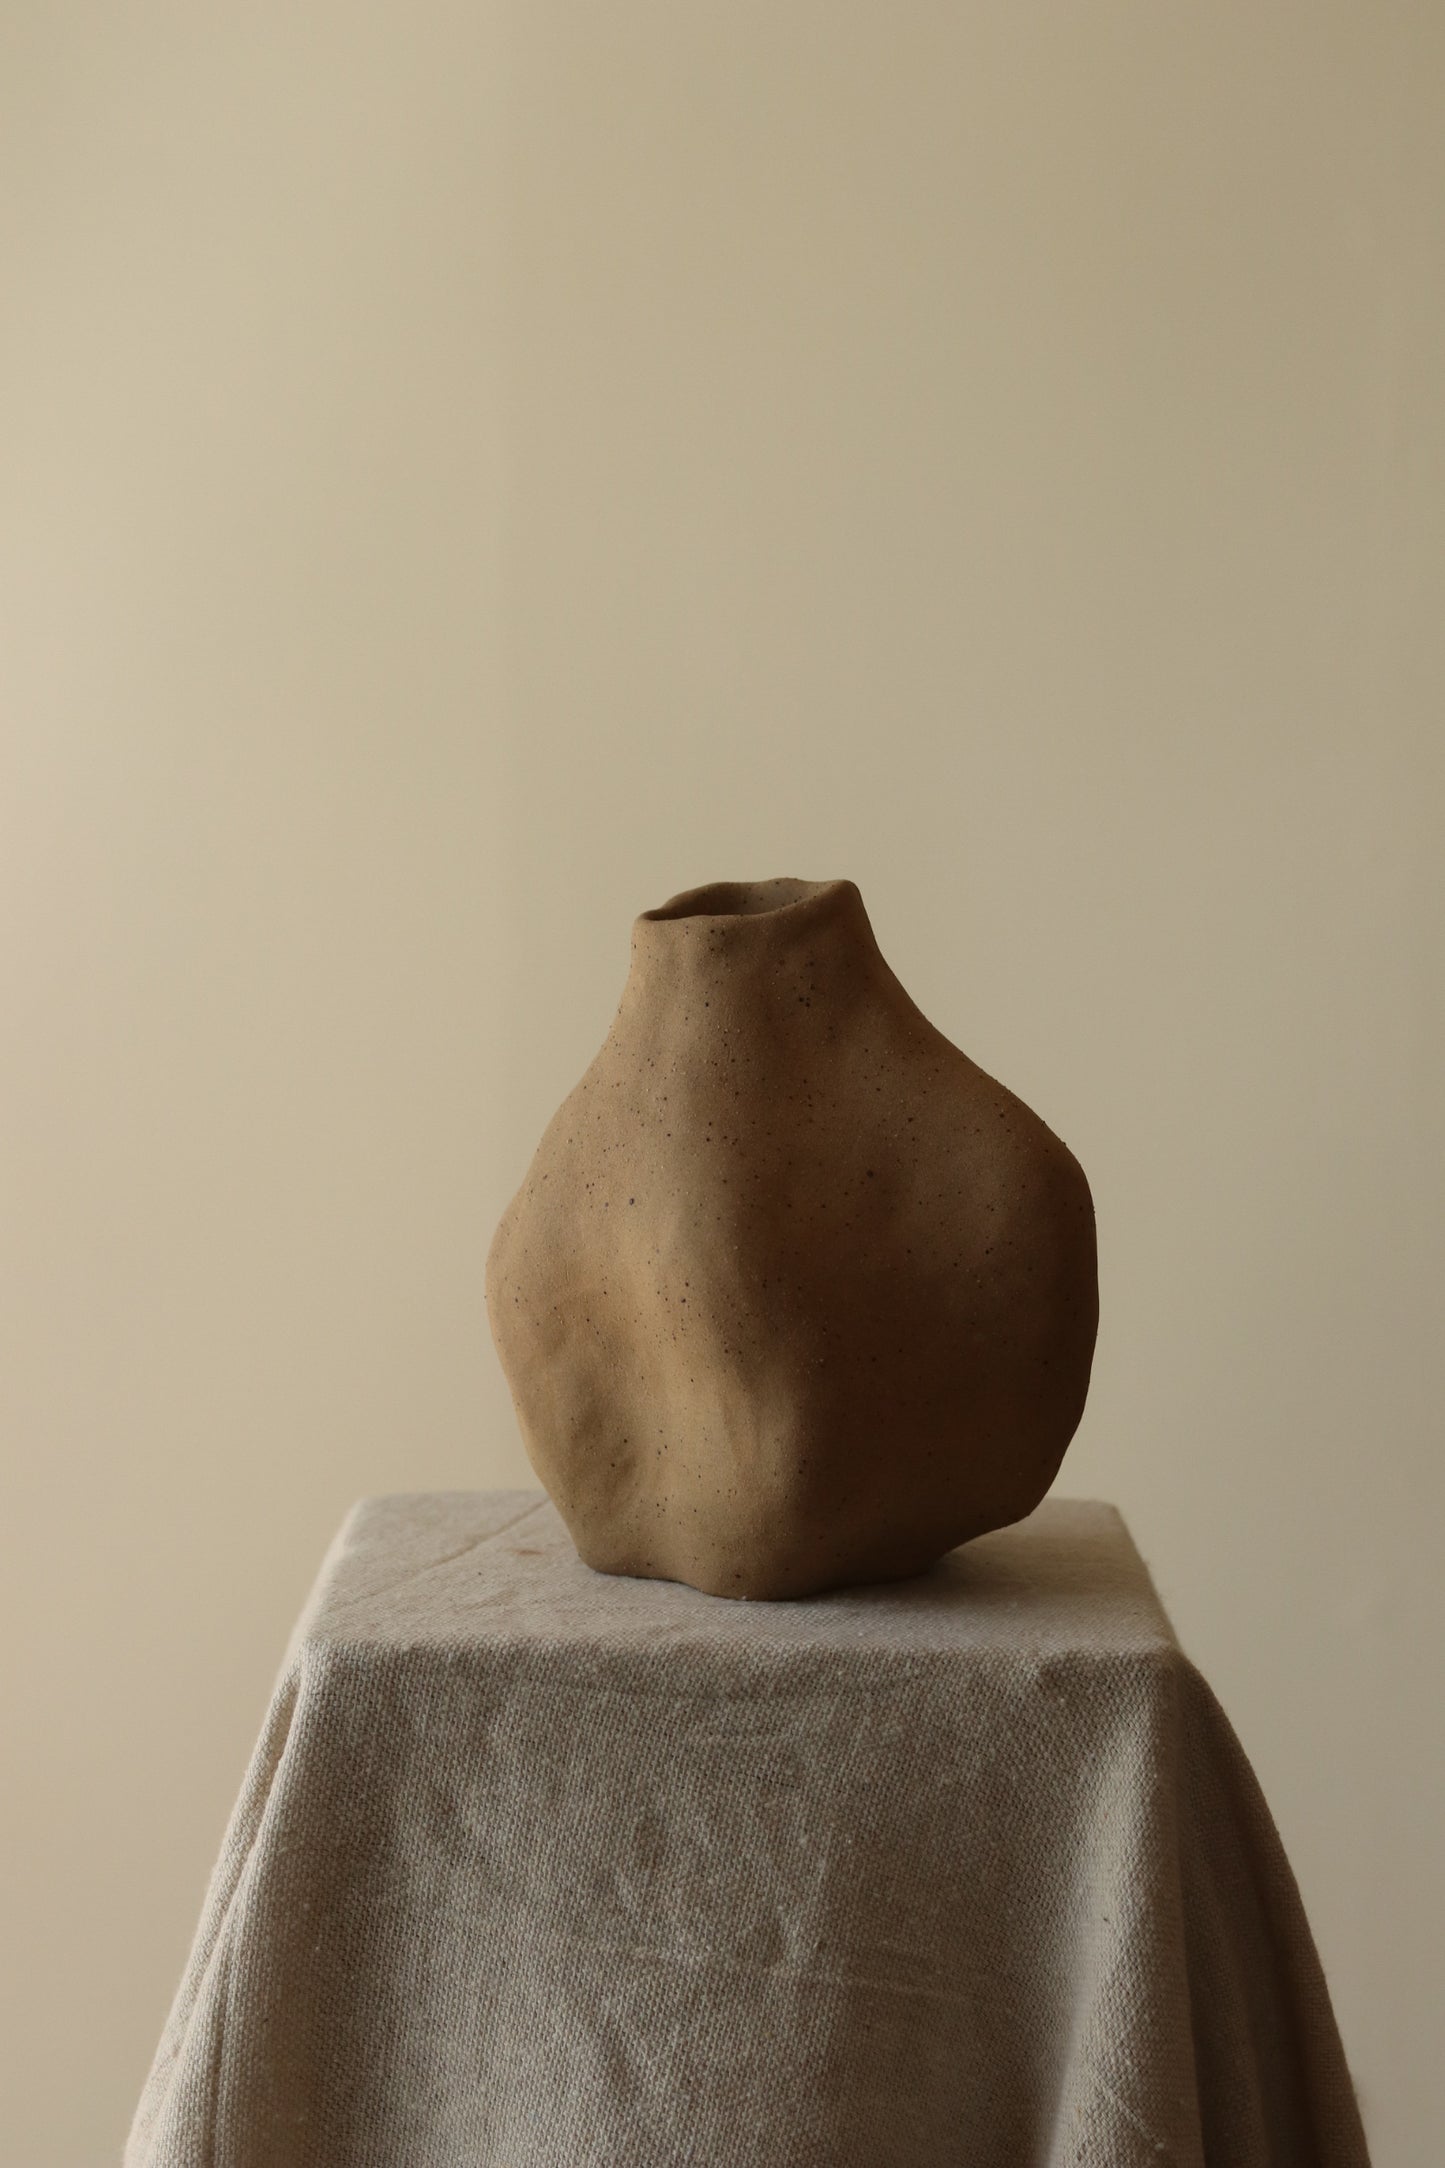 6" Gathered Earth Sculptural Vessel